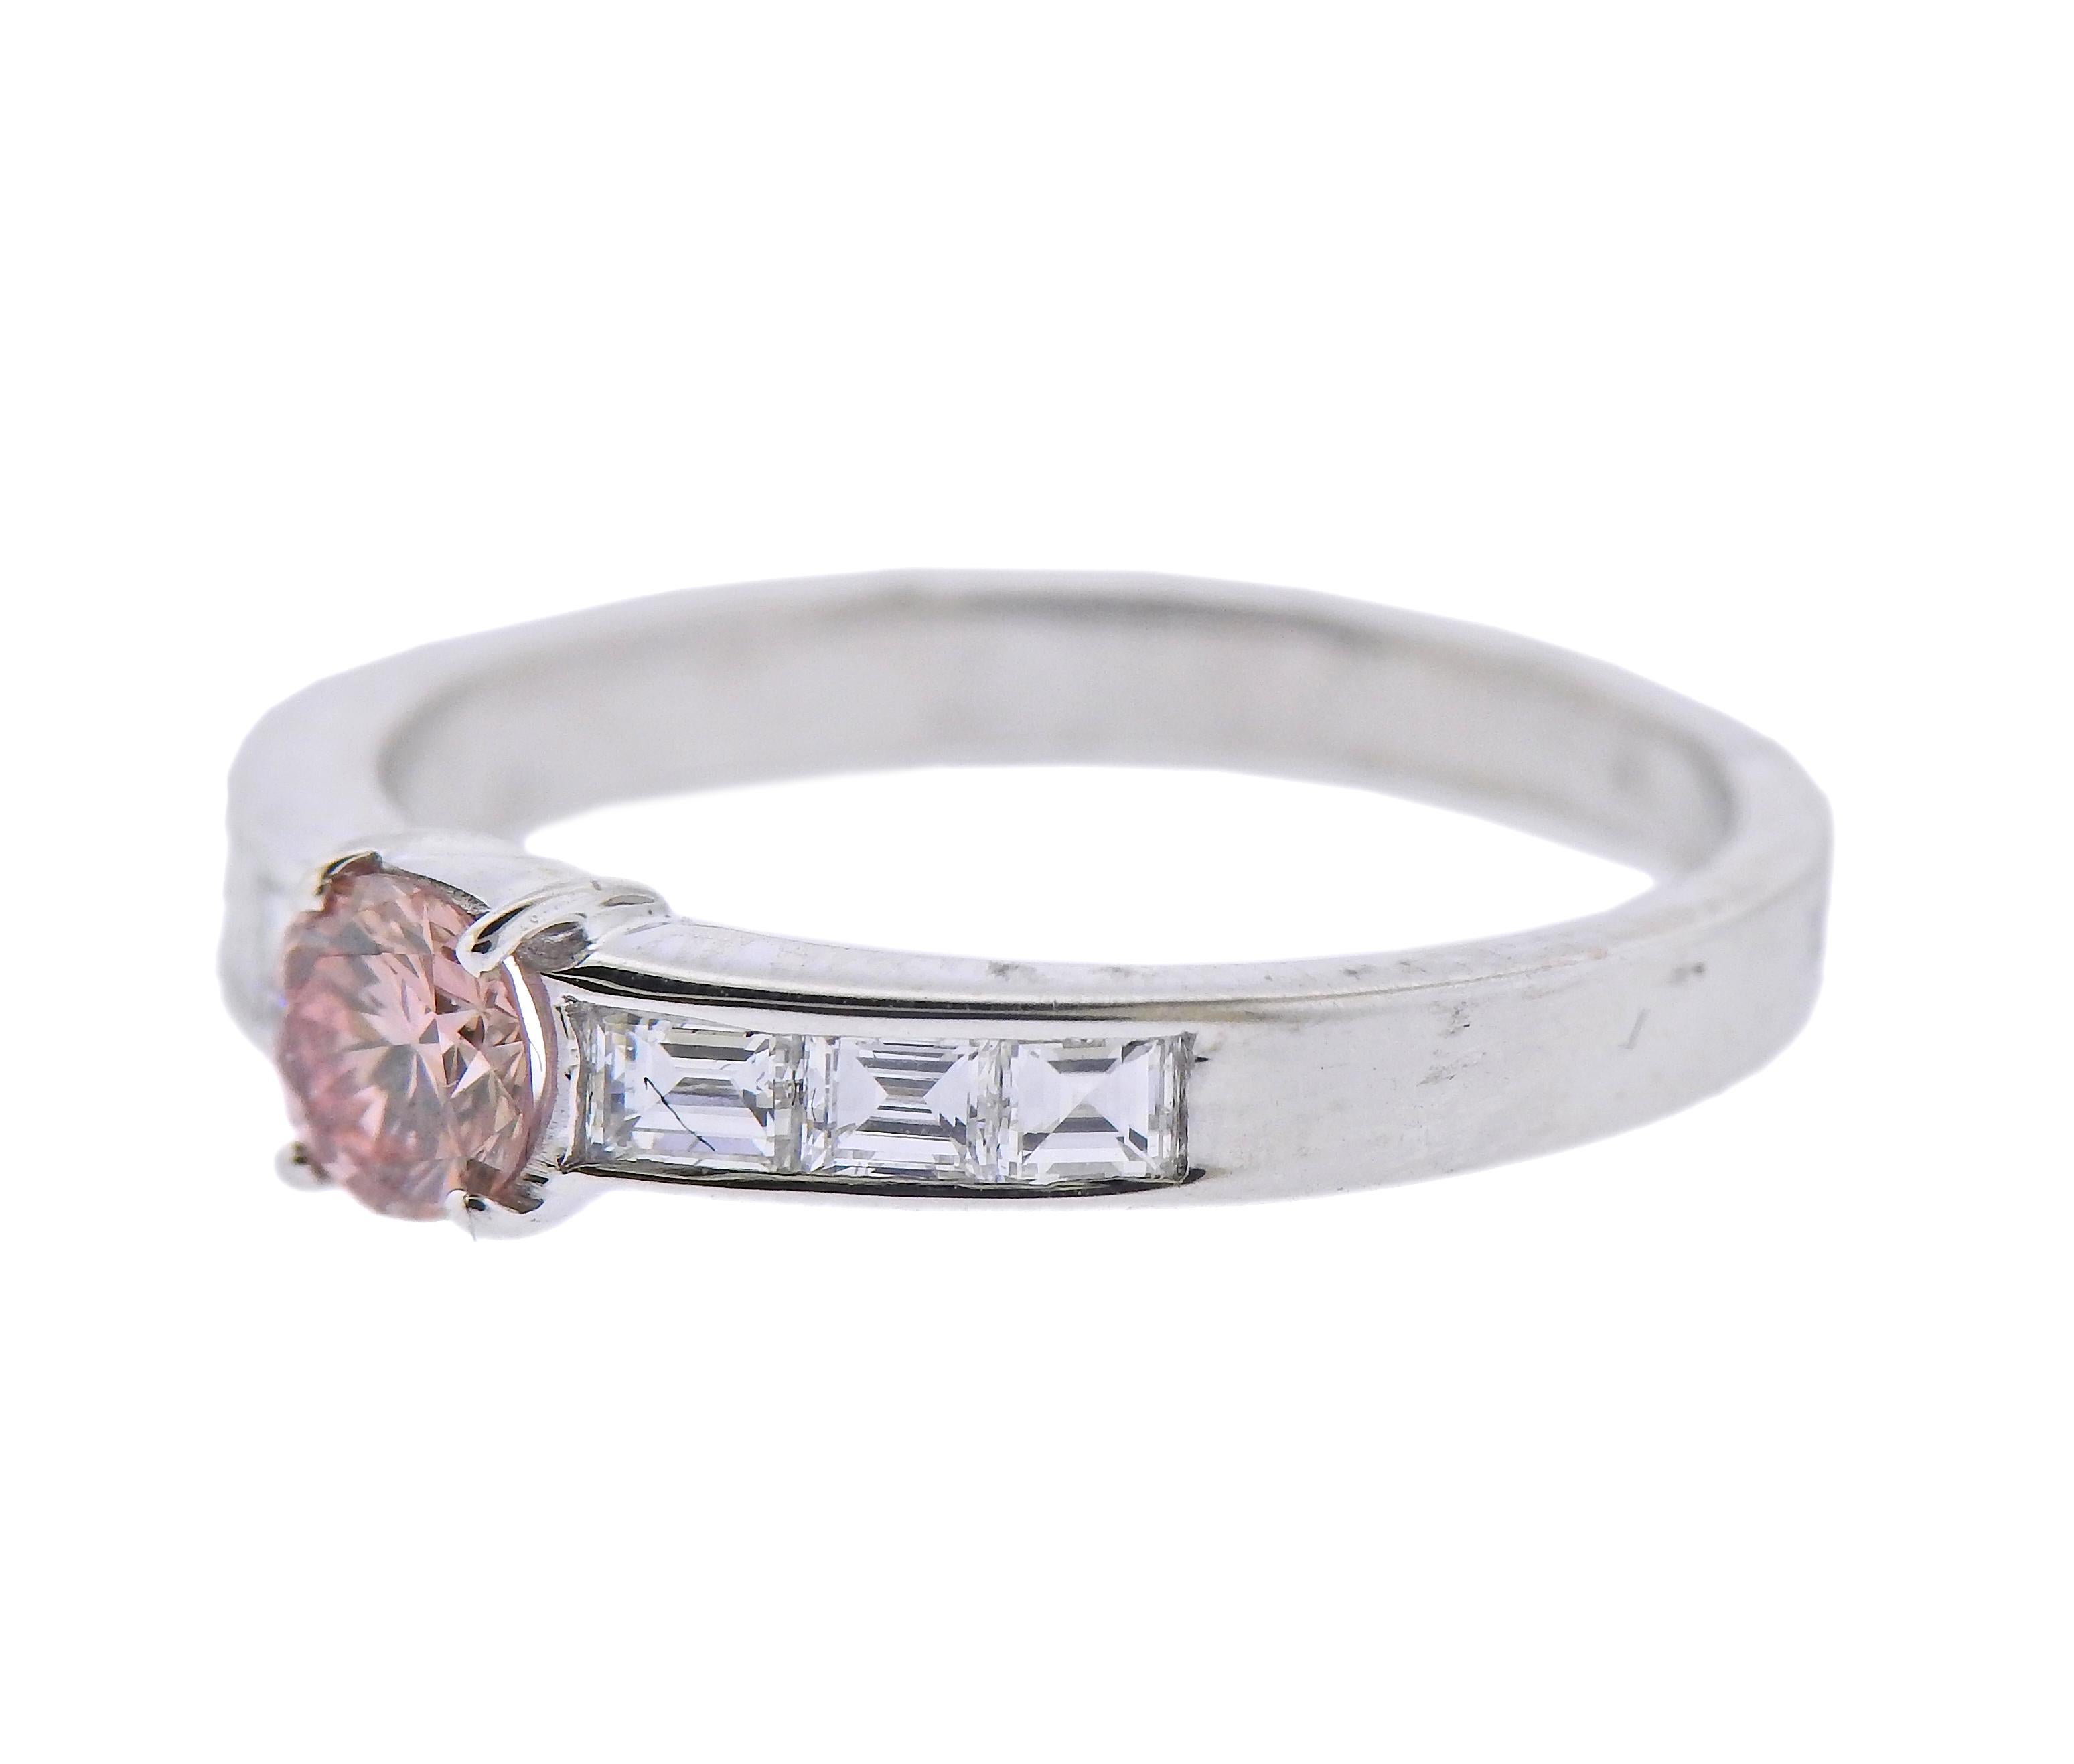 18k white gold engagement ring, with center 0.35ct pinkish/brown center diamond and side square cut white diamonds - approx. 0.30cts. Ring size - 6.75. Marked: 750. Weight - 3.1 grams. 